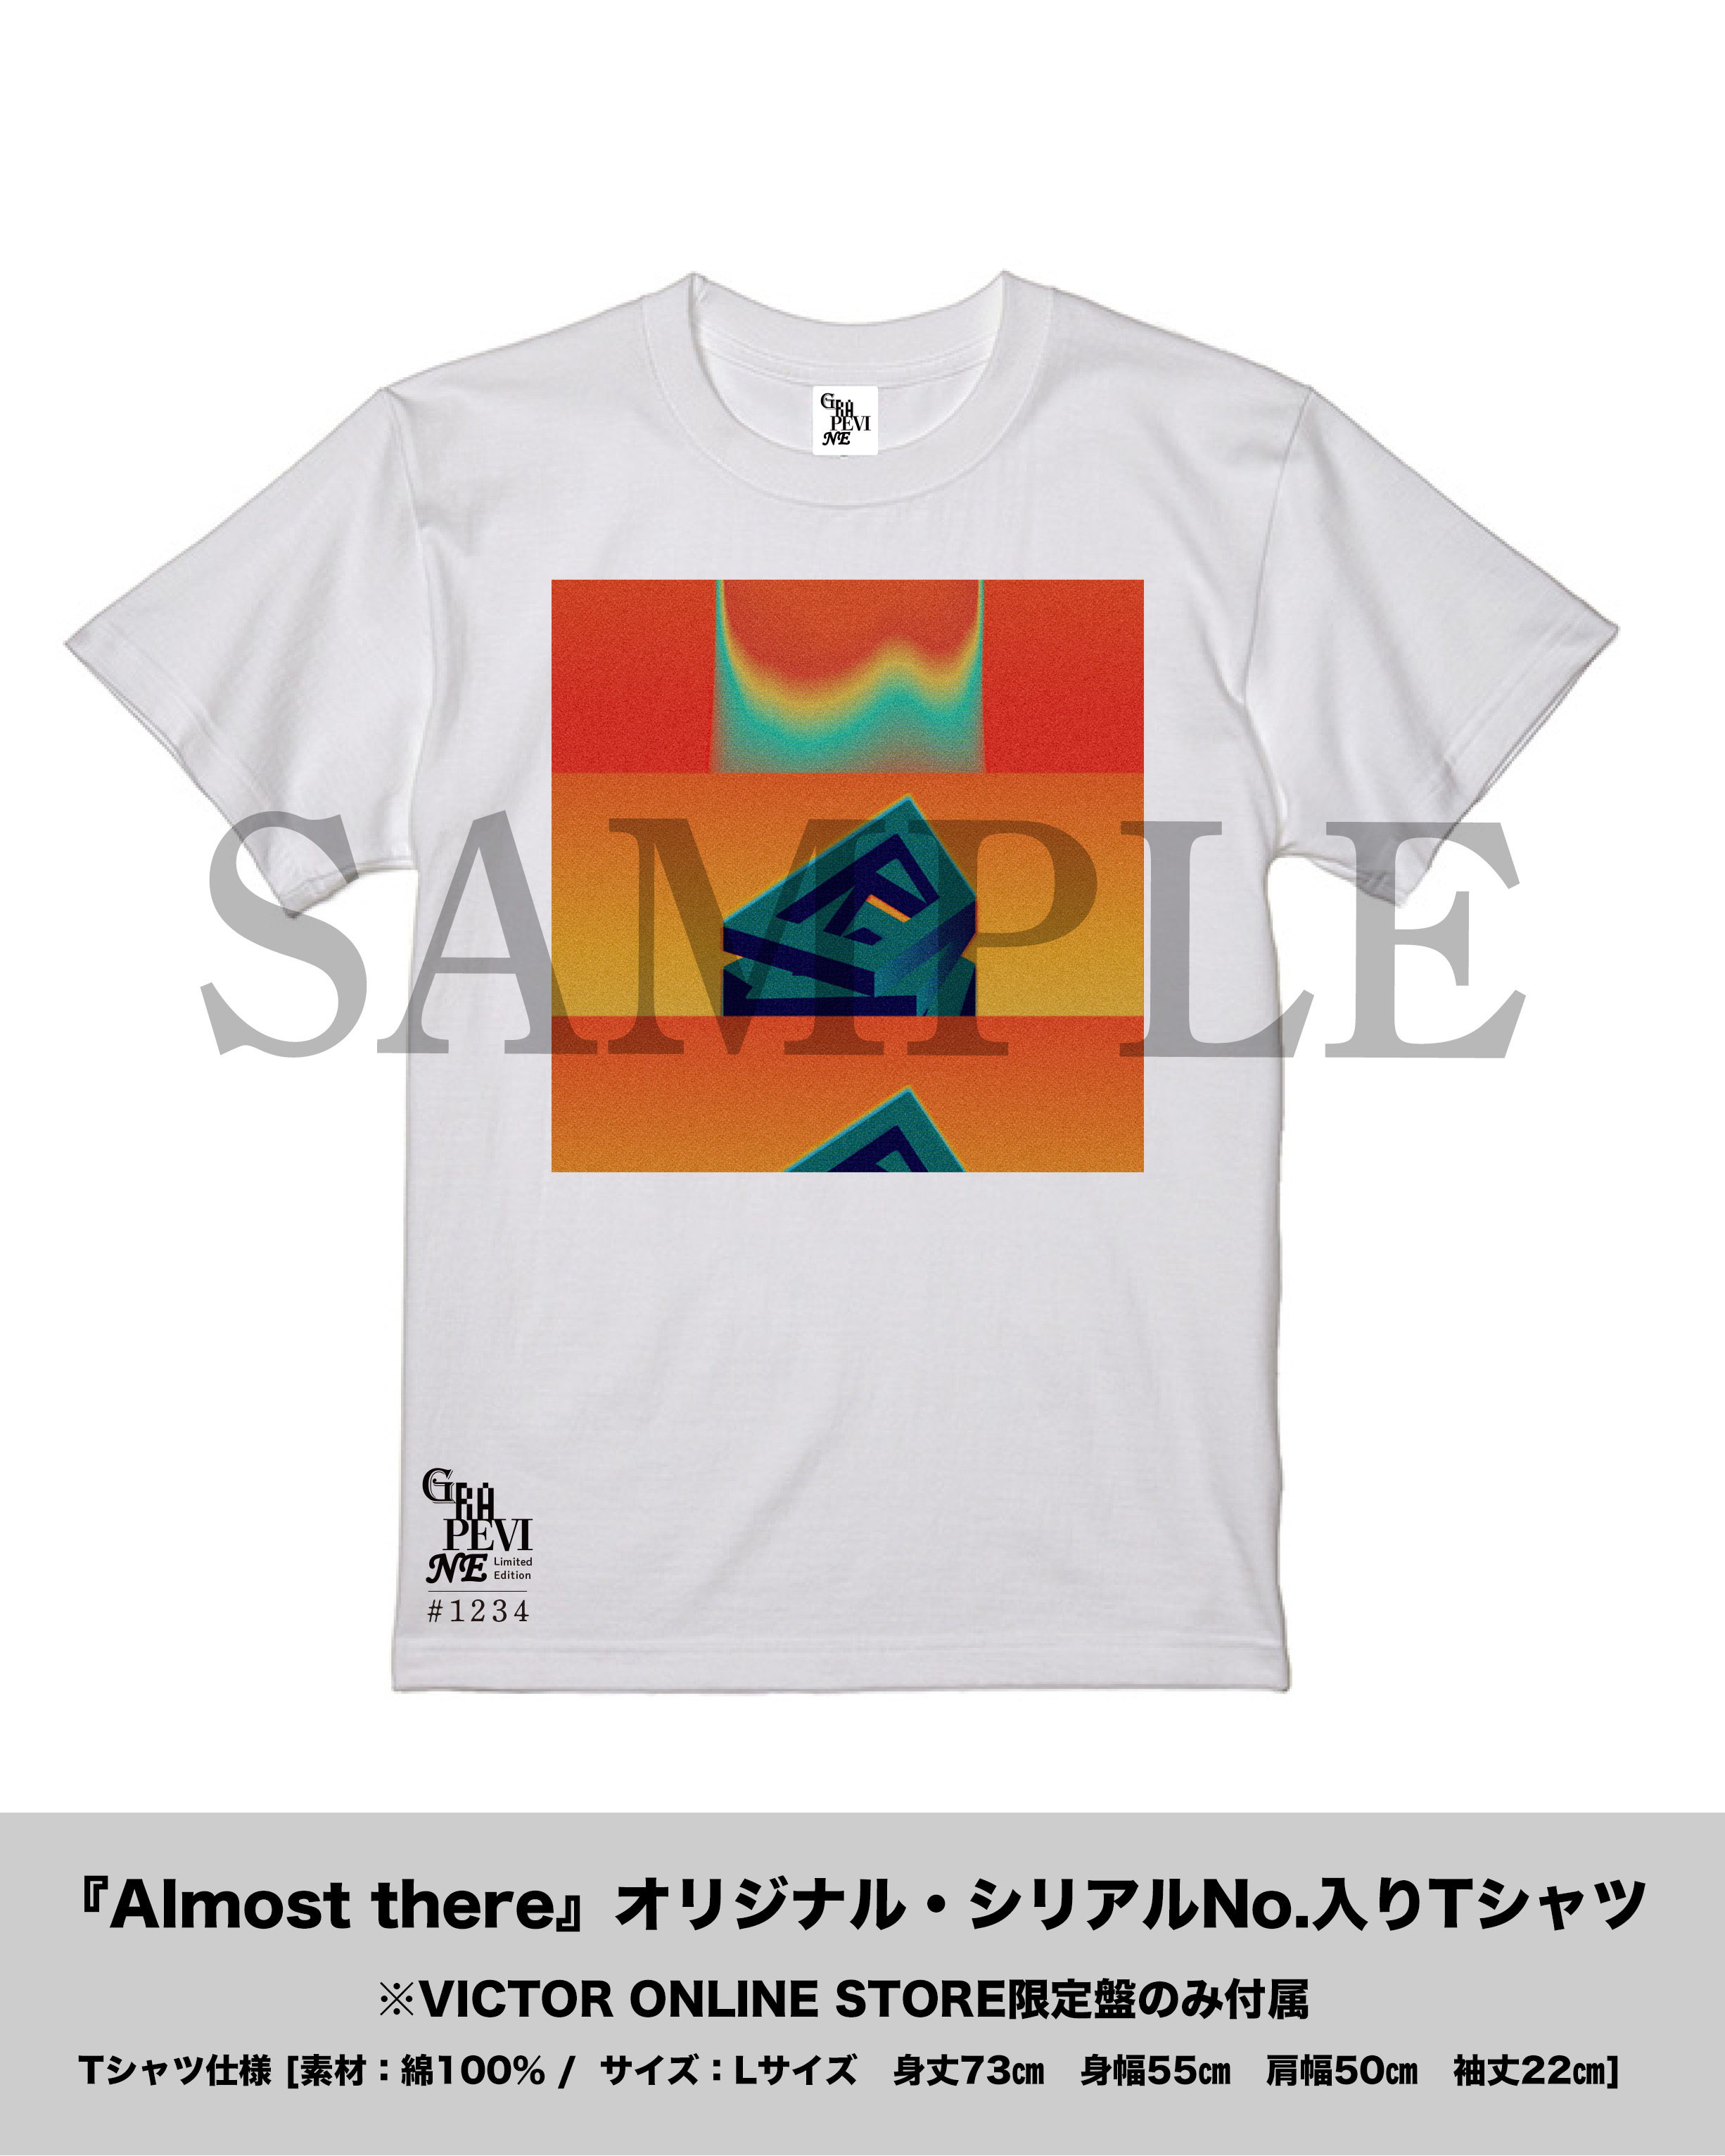 Almost there | VICTOR ONLINE STORE限定セット | 初回限定盤+オリジナル・シリアルNo.入りTシャツ